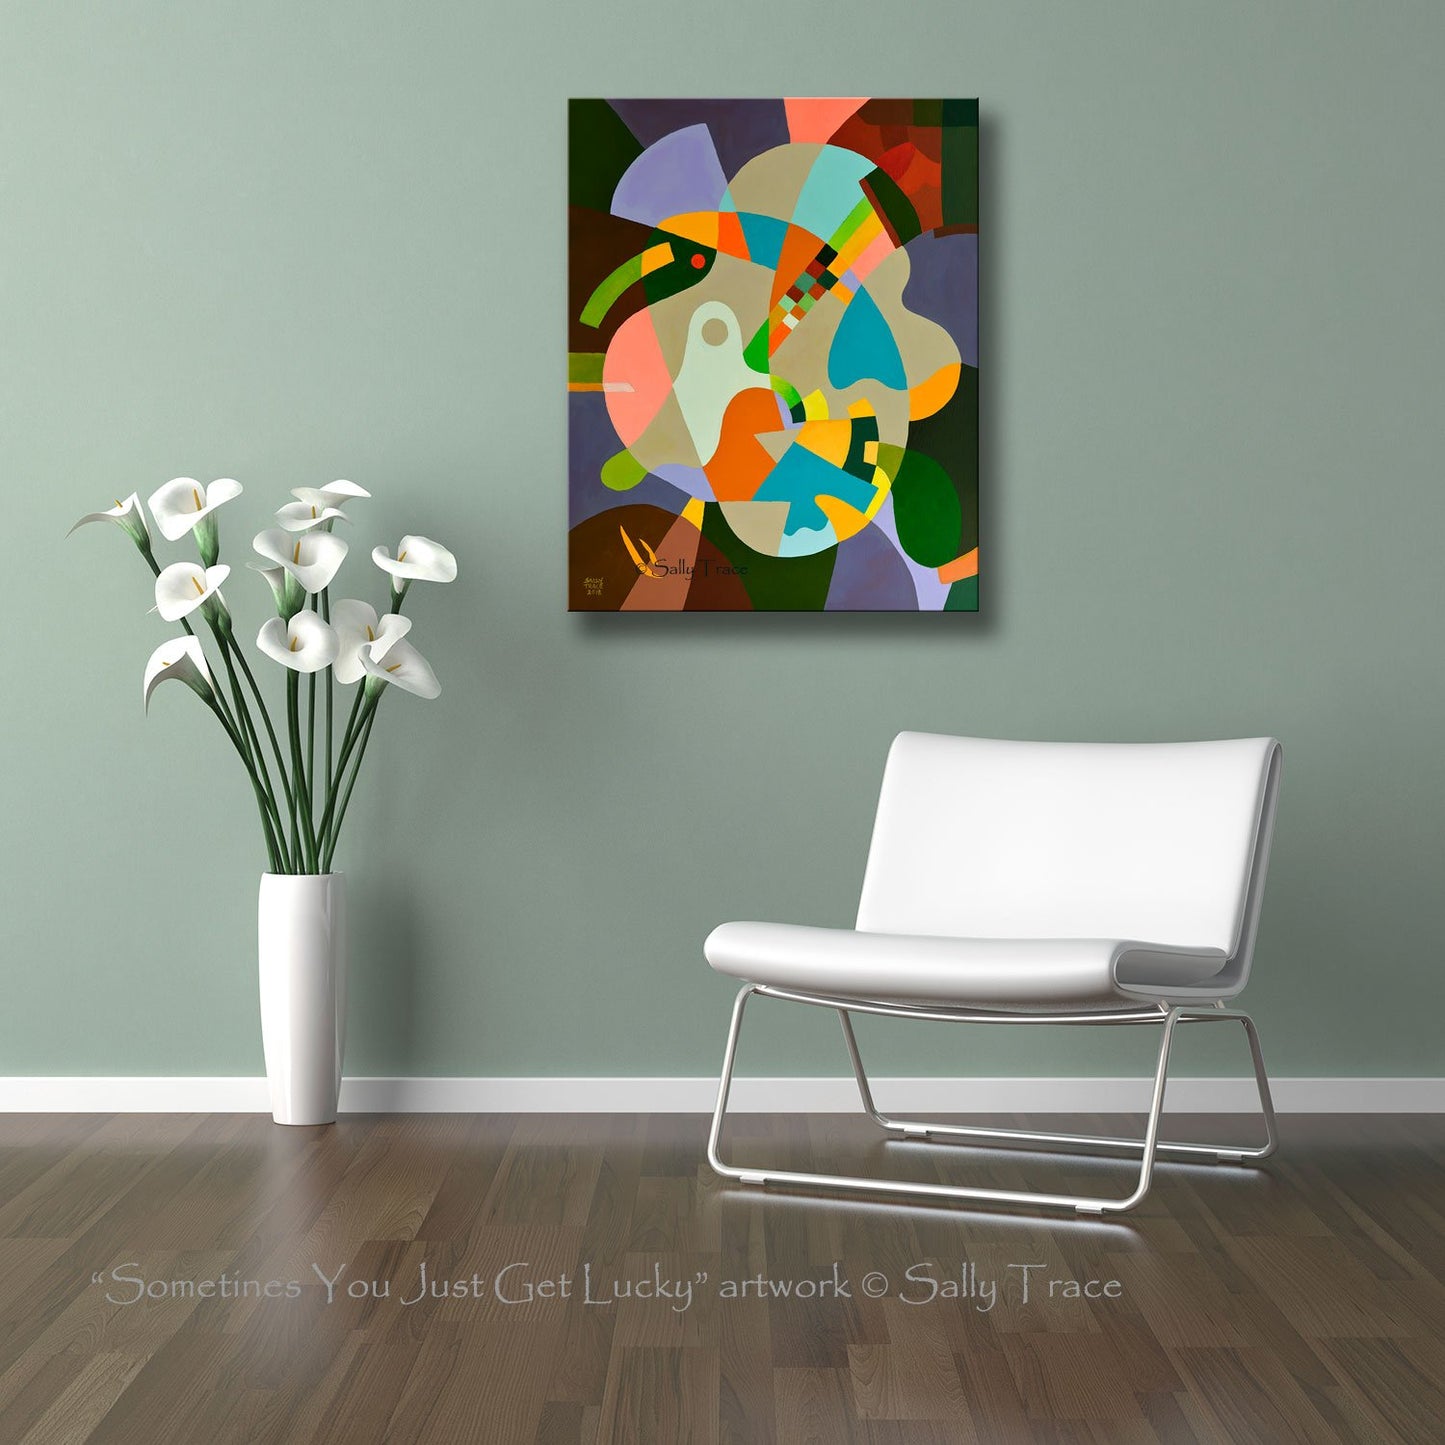 "Sometimes you Just get Lucky" geometric hard-edged original acrylic painting by Sally Trace, room view